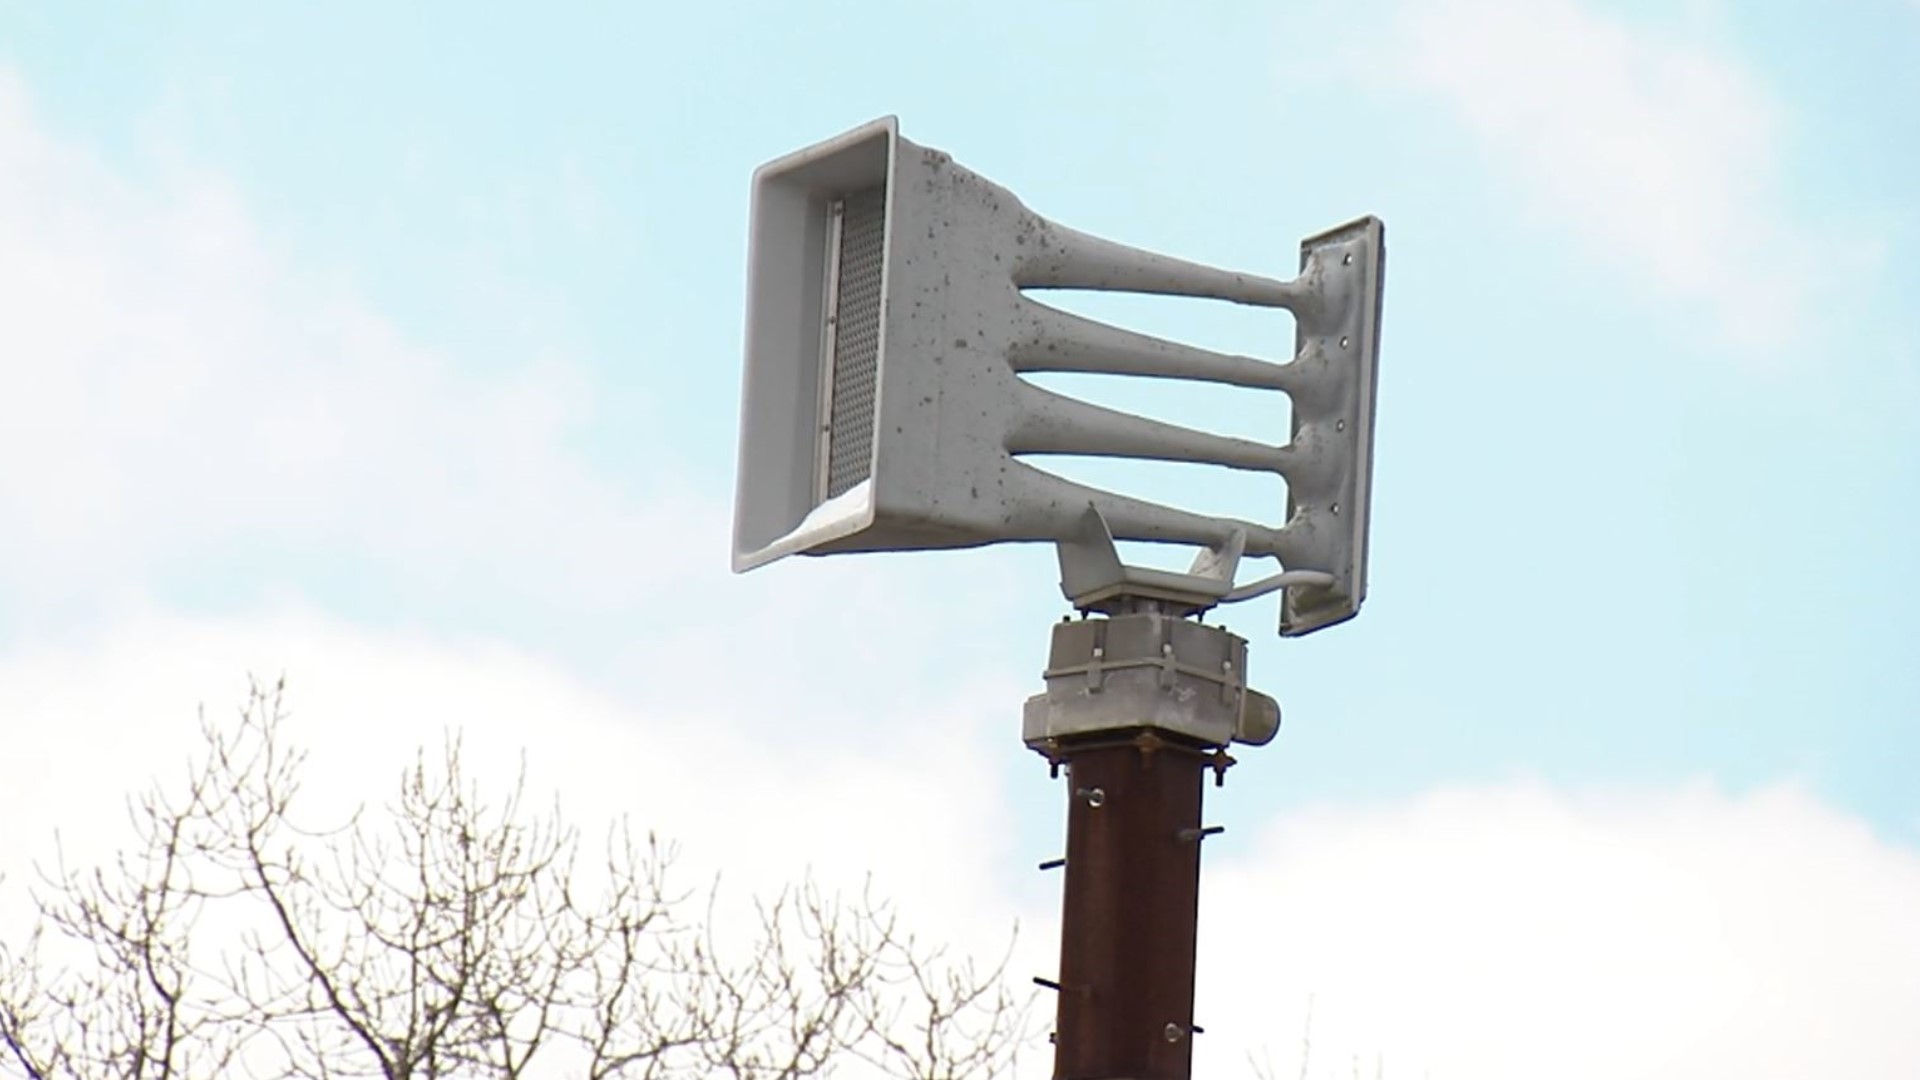 Tornado sirens across the state will be activated Wednesday morning as part of an annual drill.